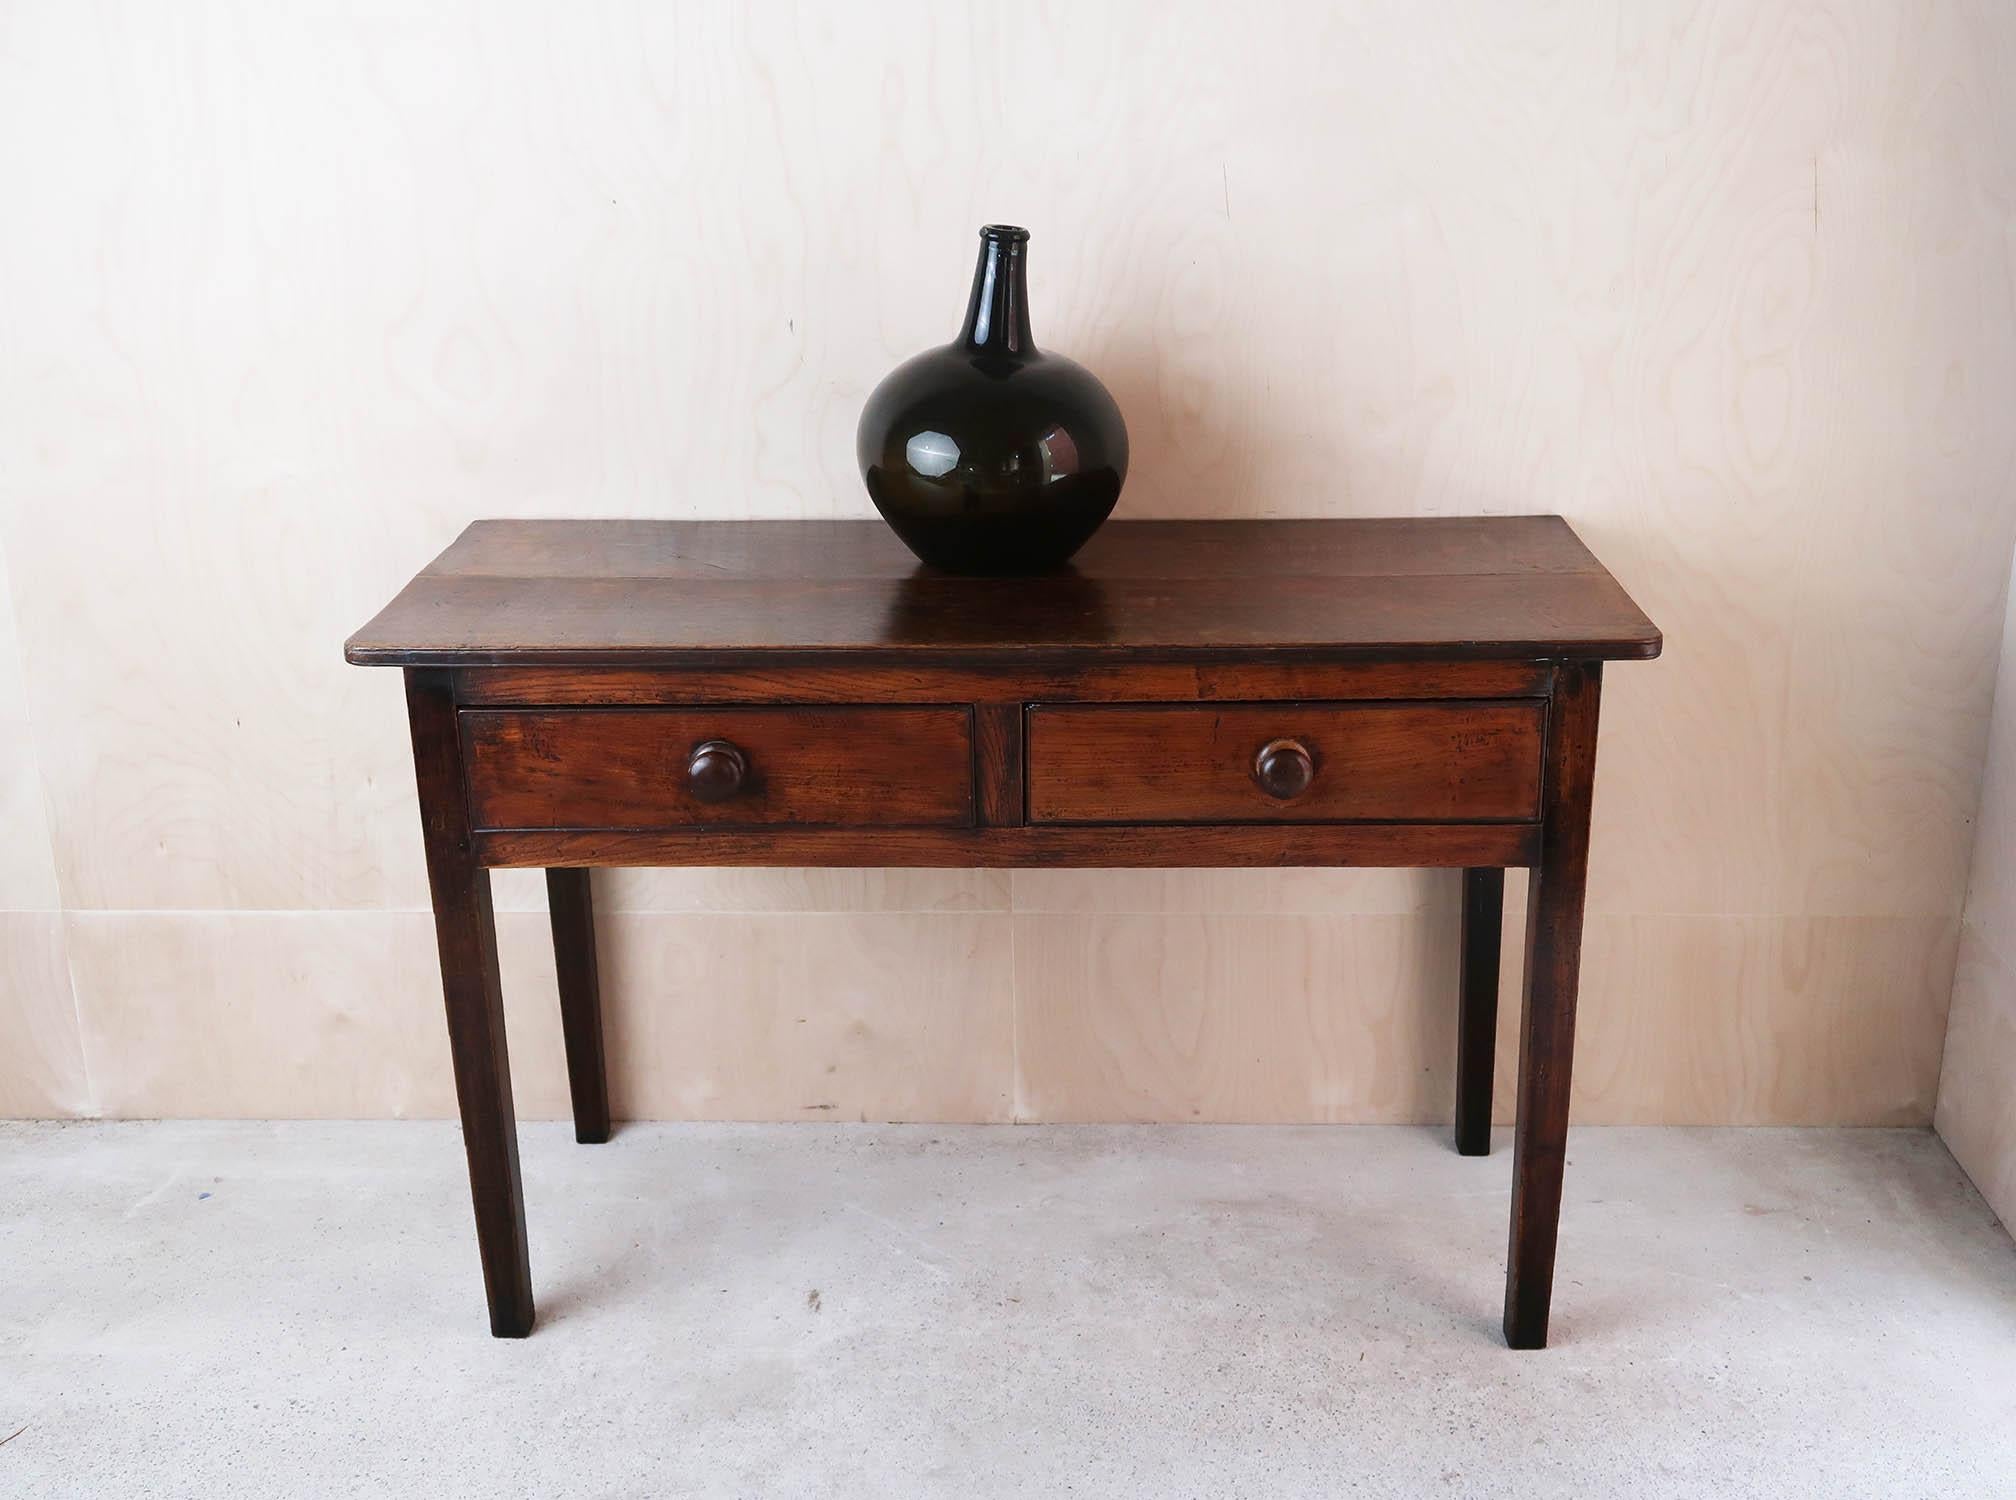 Rustic Antique English Oak and Elm Dresser Base or Side Table, 18th Century